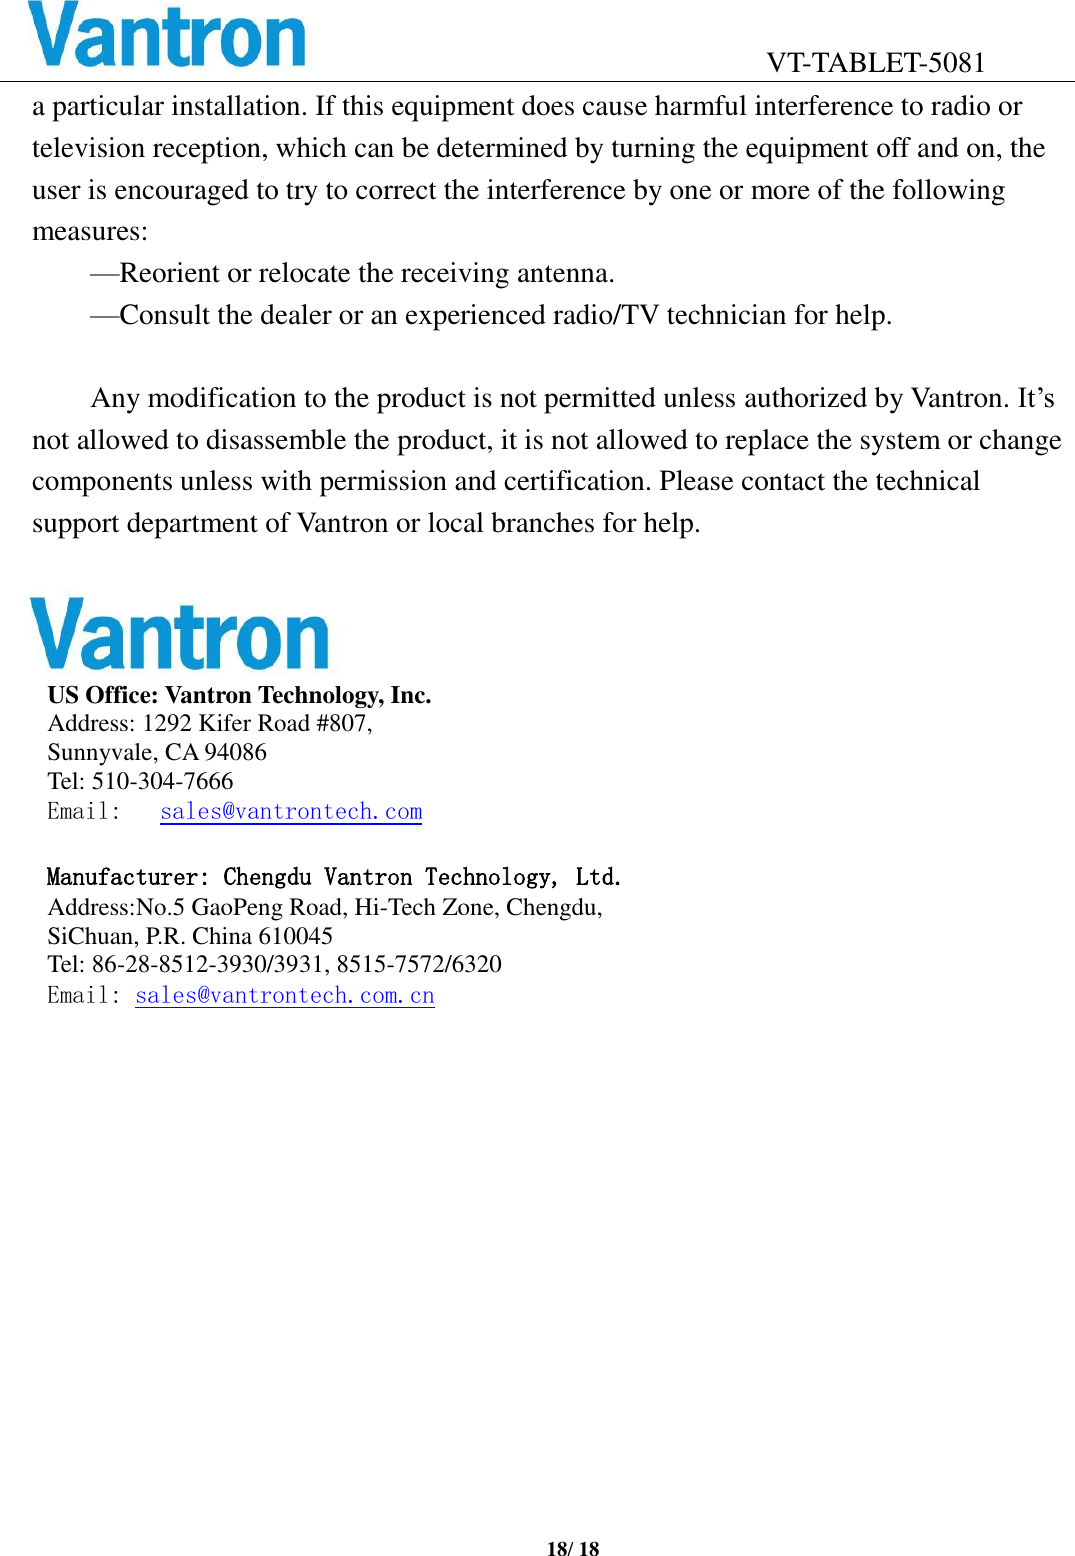 Page 18 of Chengdu Vantron Technology VTTABLET-5081 Tablet Computer User Manual